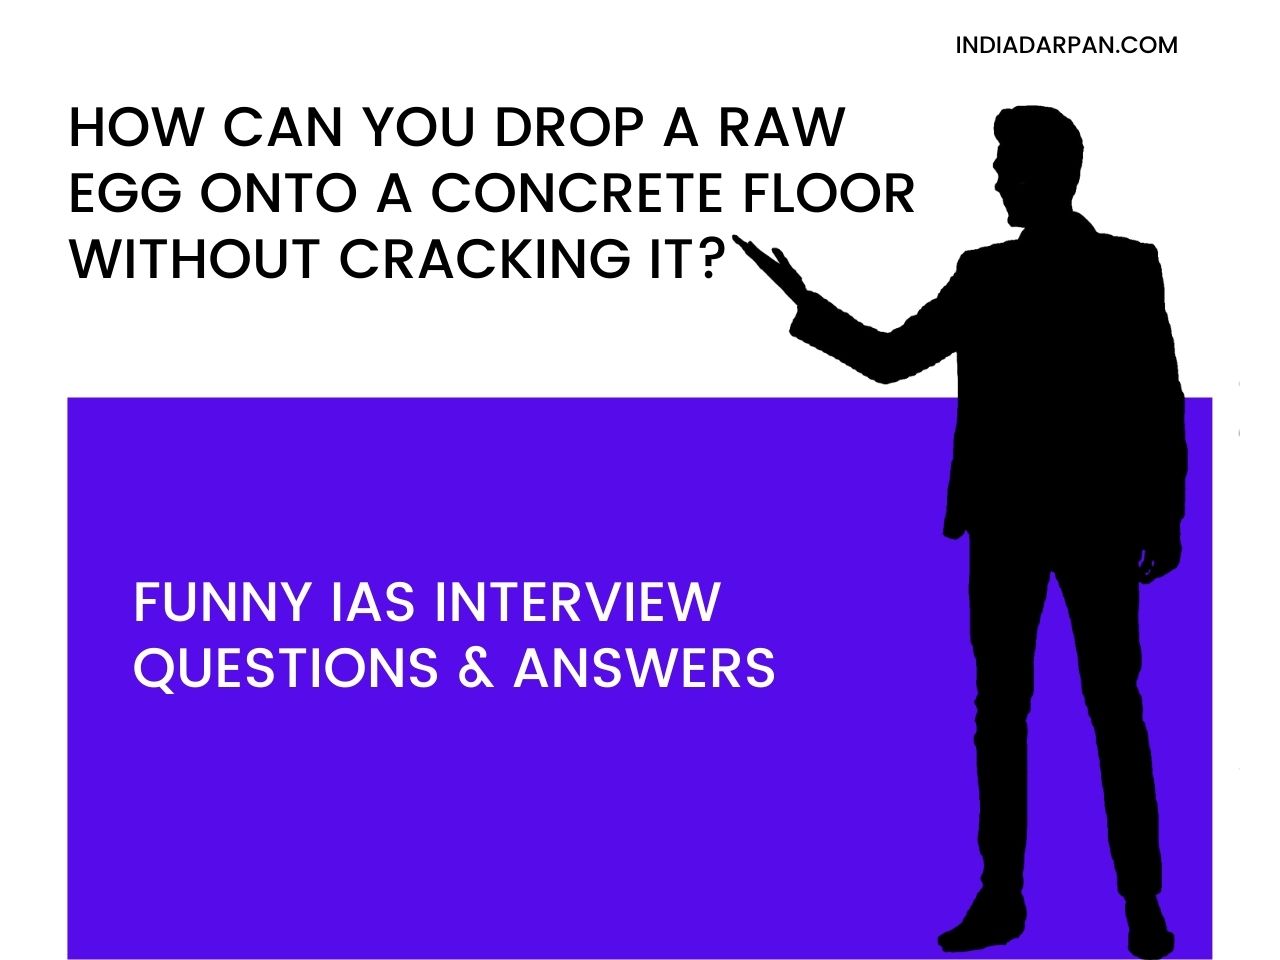 Funny IAS Interview Questions & Answers